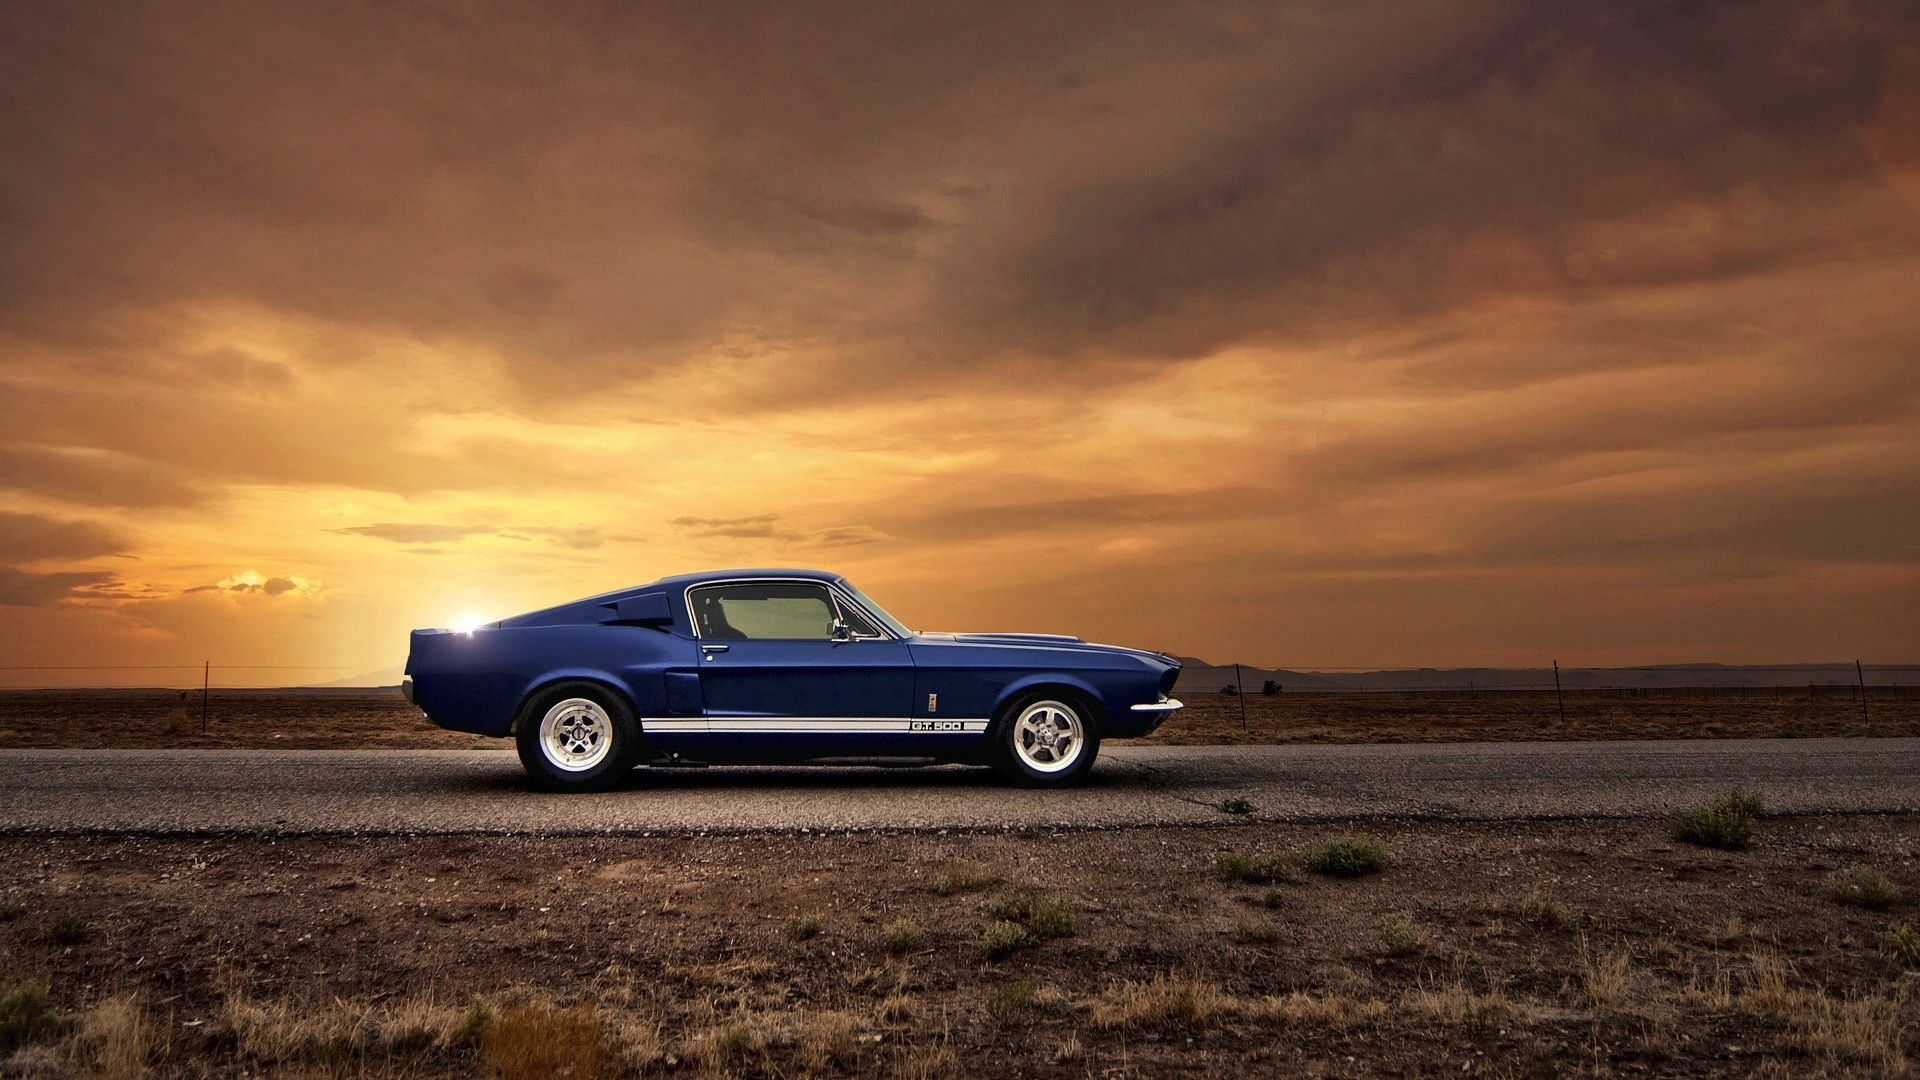 Classic Cars Wallpaper 4k Best Cars Wallpapers Images, Photos, Reviews